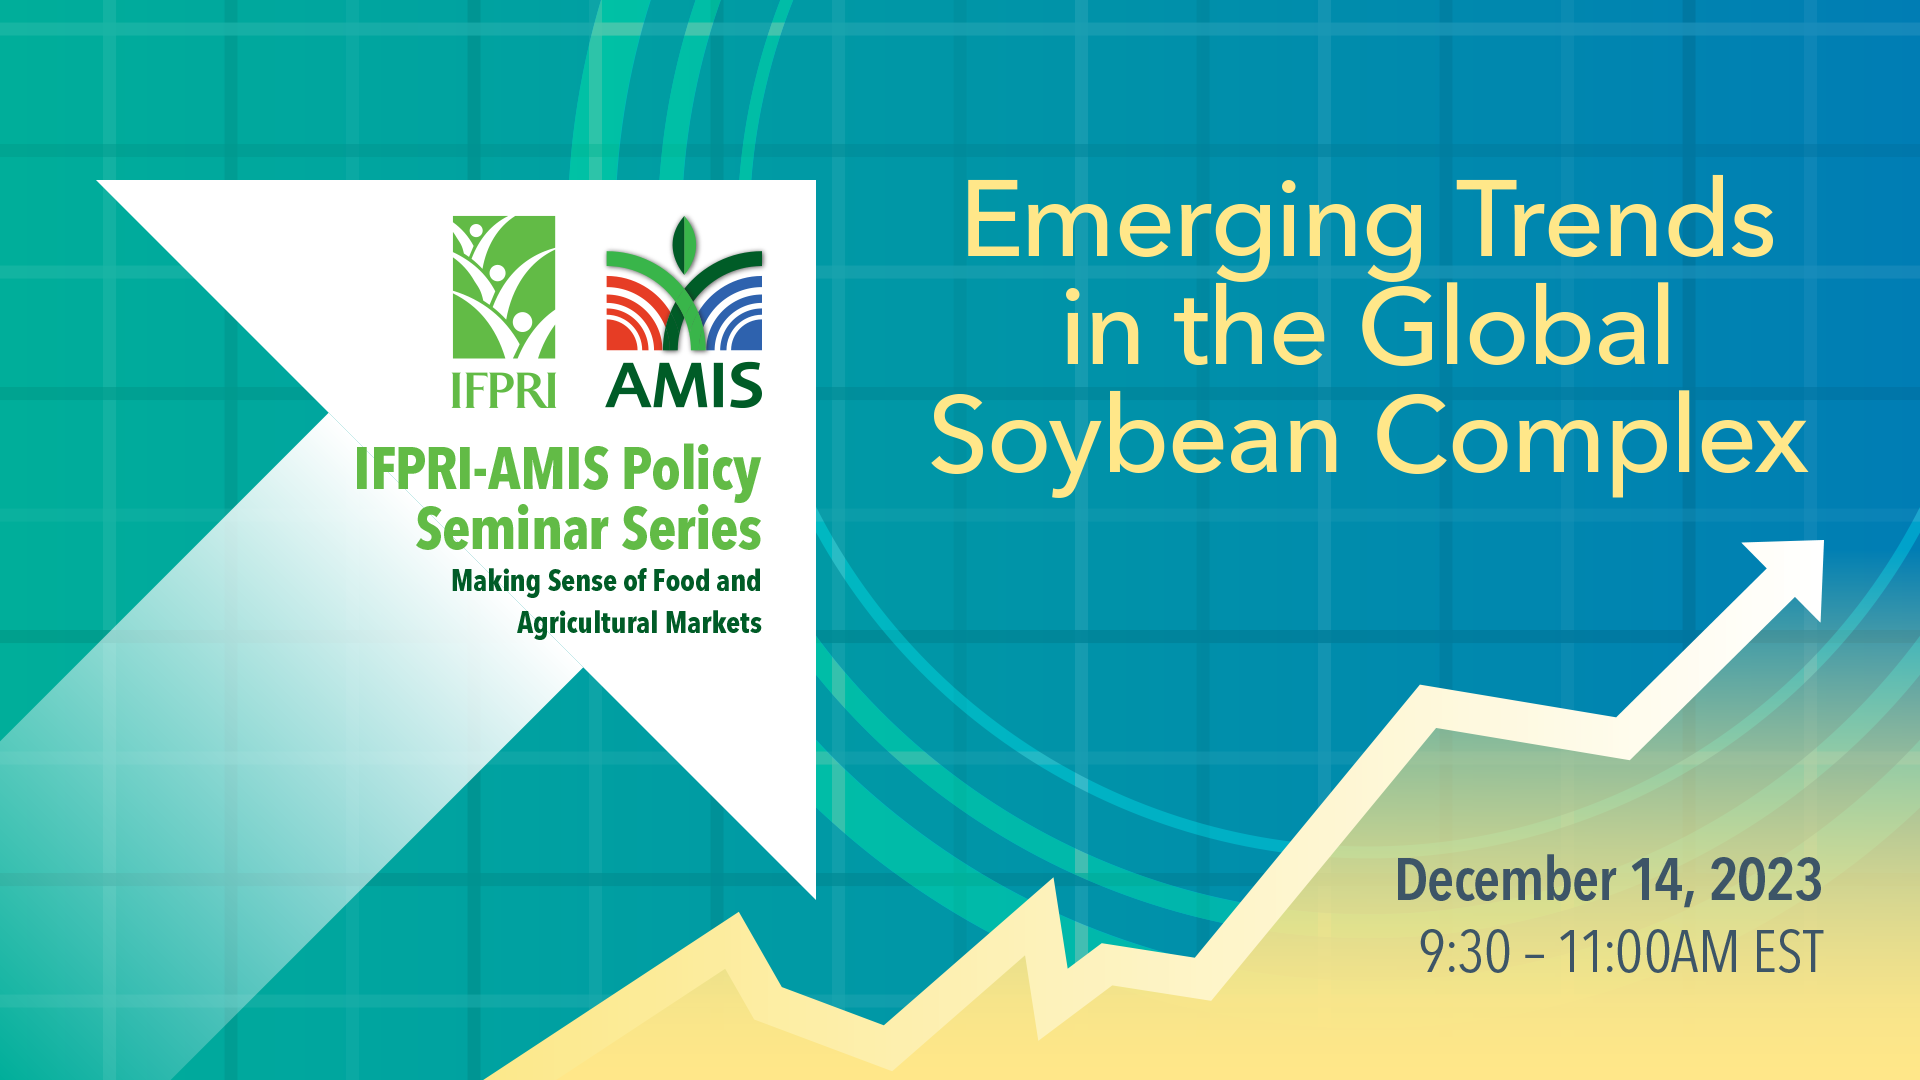 Emerging Trends in the Global Soybean Complex